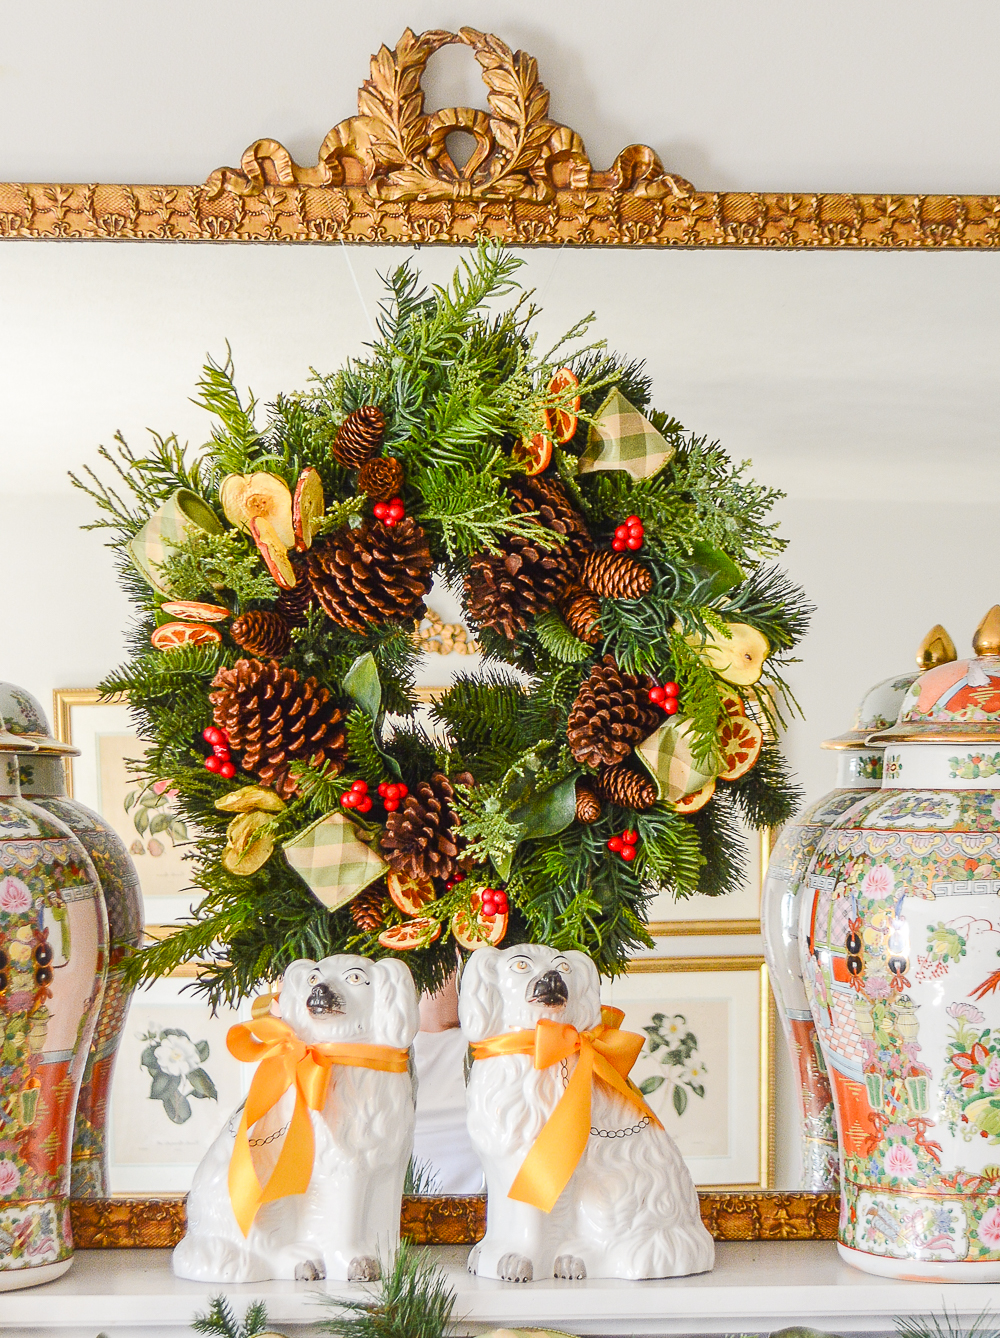 One faux evergreen wreath decorated two ways with pinecones, fruit slices, and plaid ribbon.